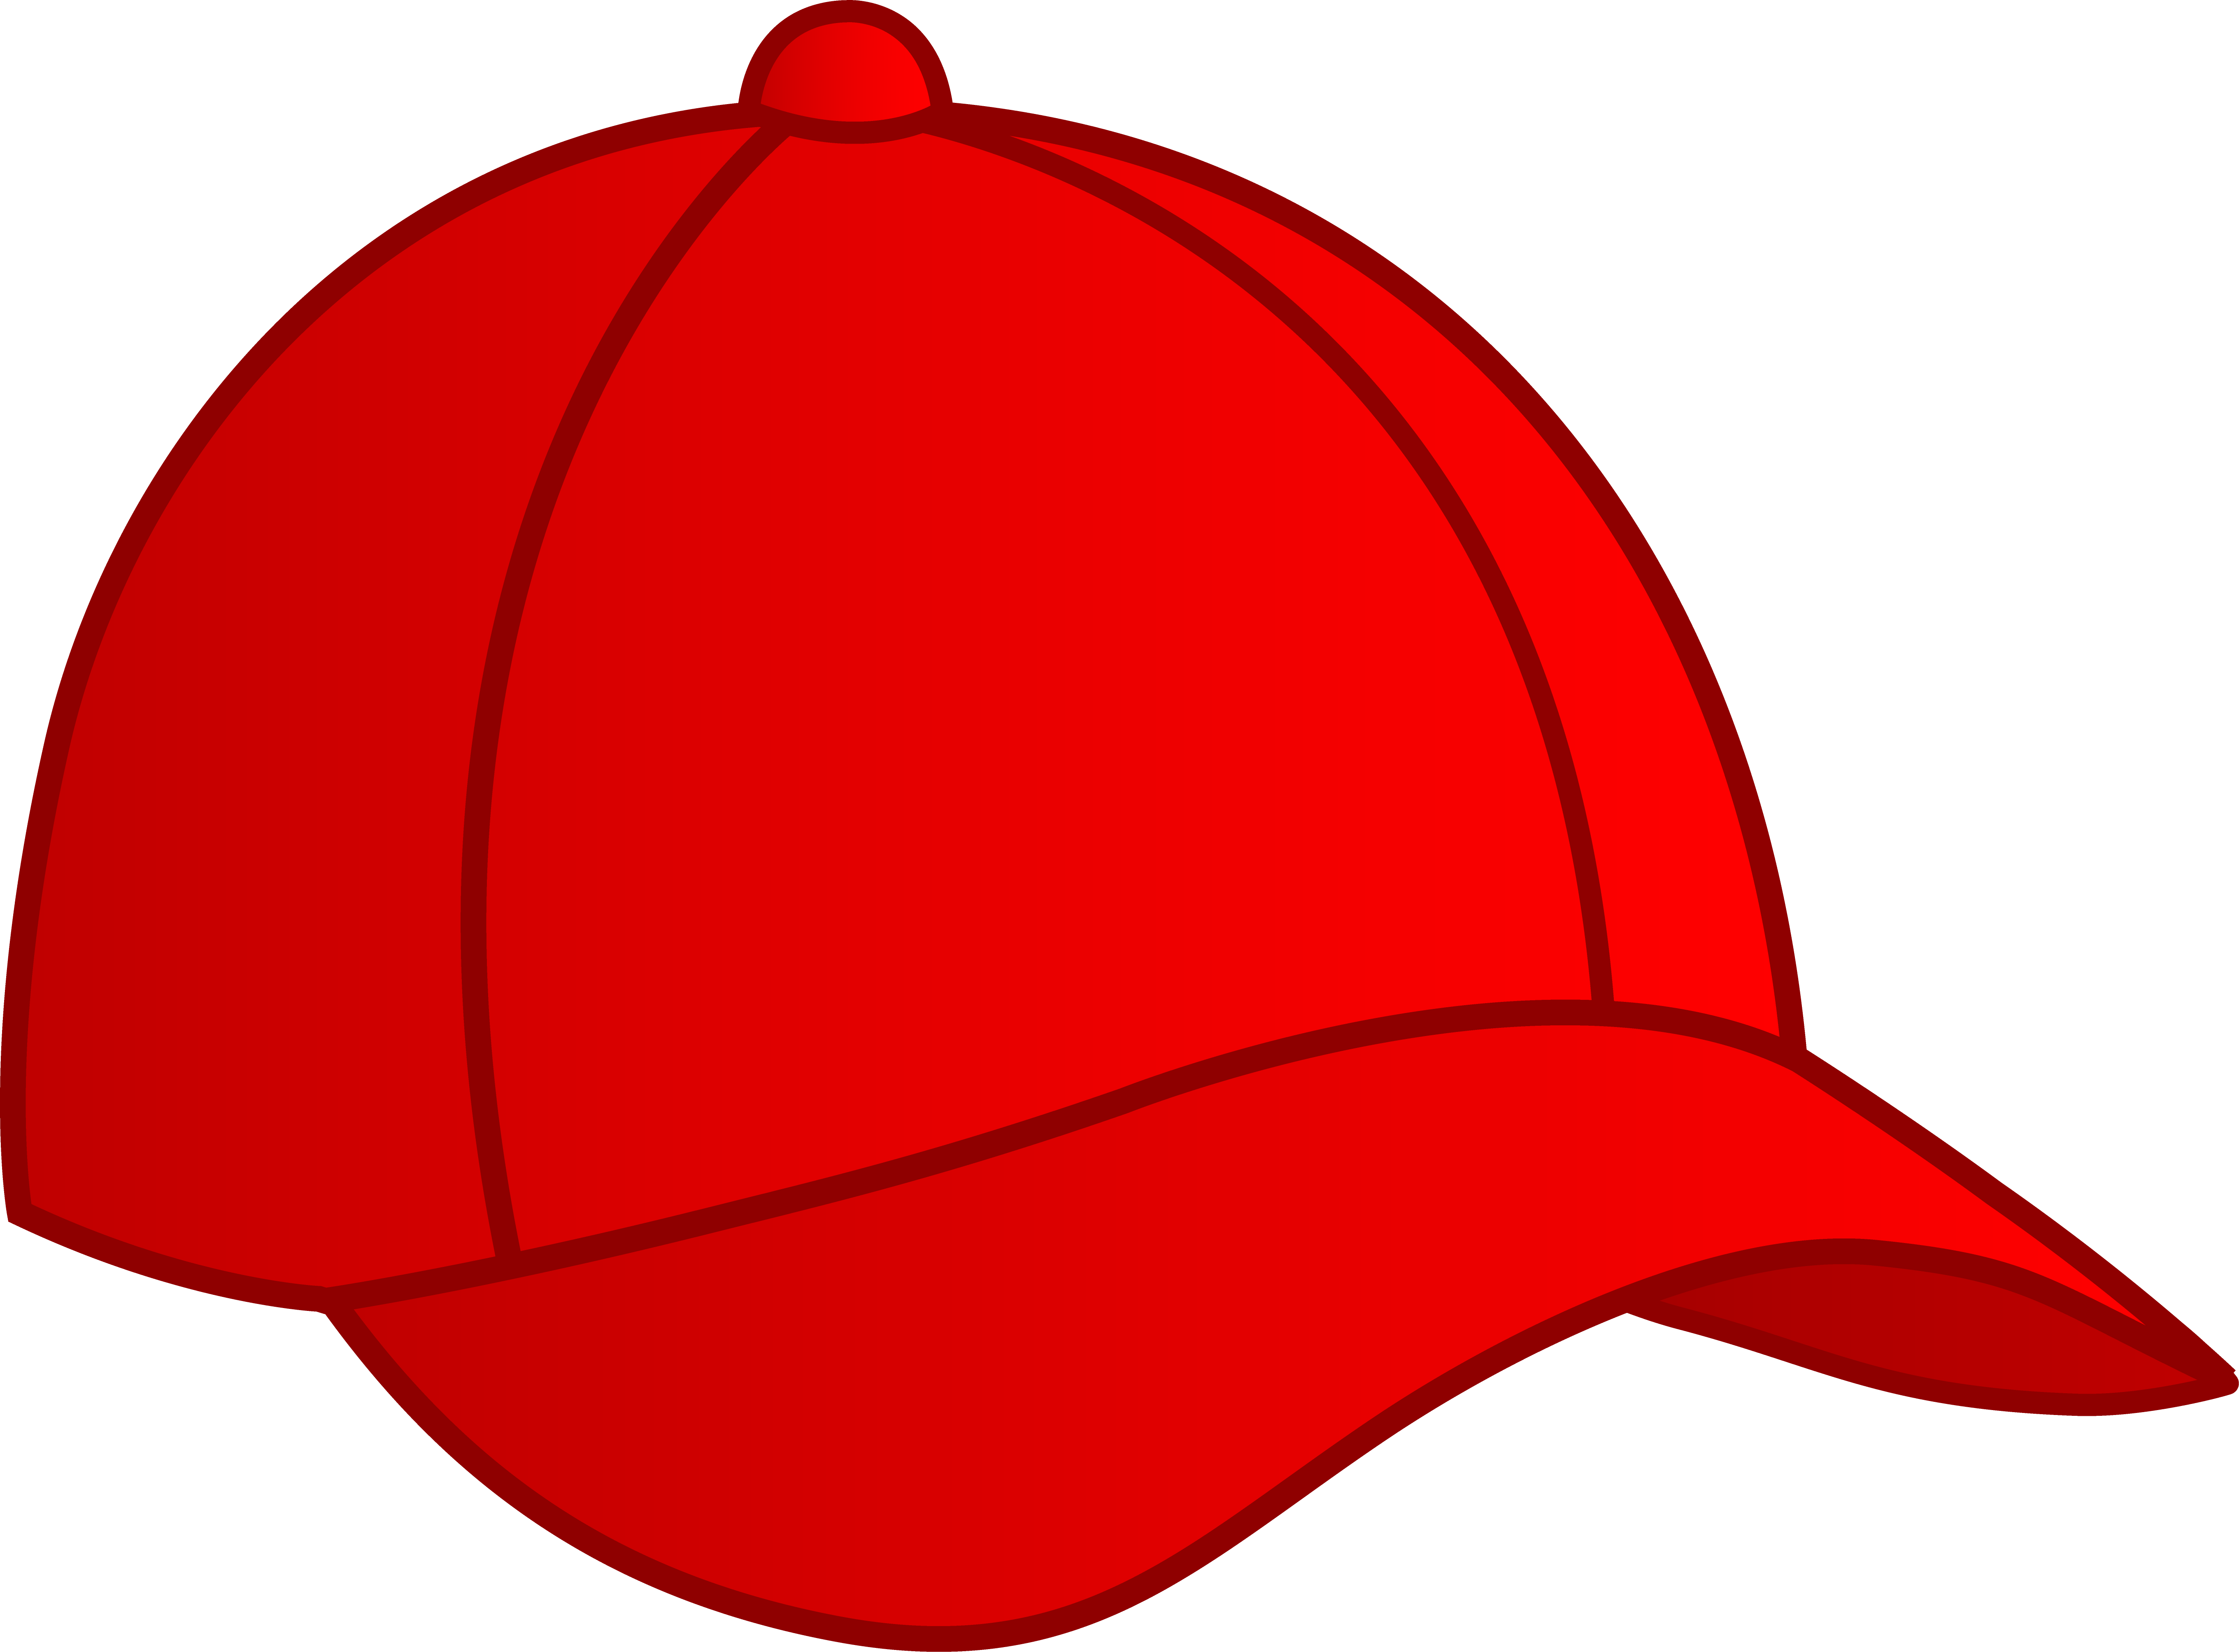 Baseball hat clipart side view free clipart images